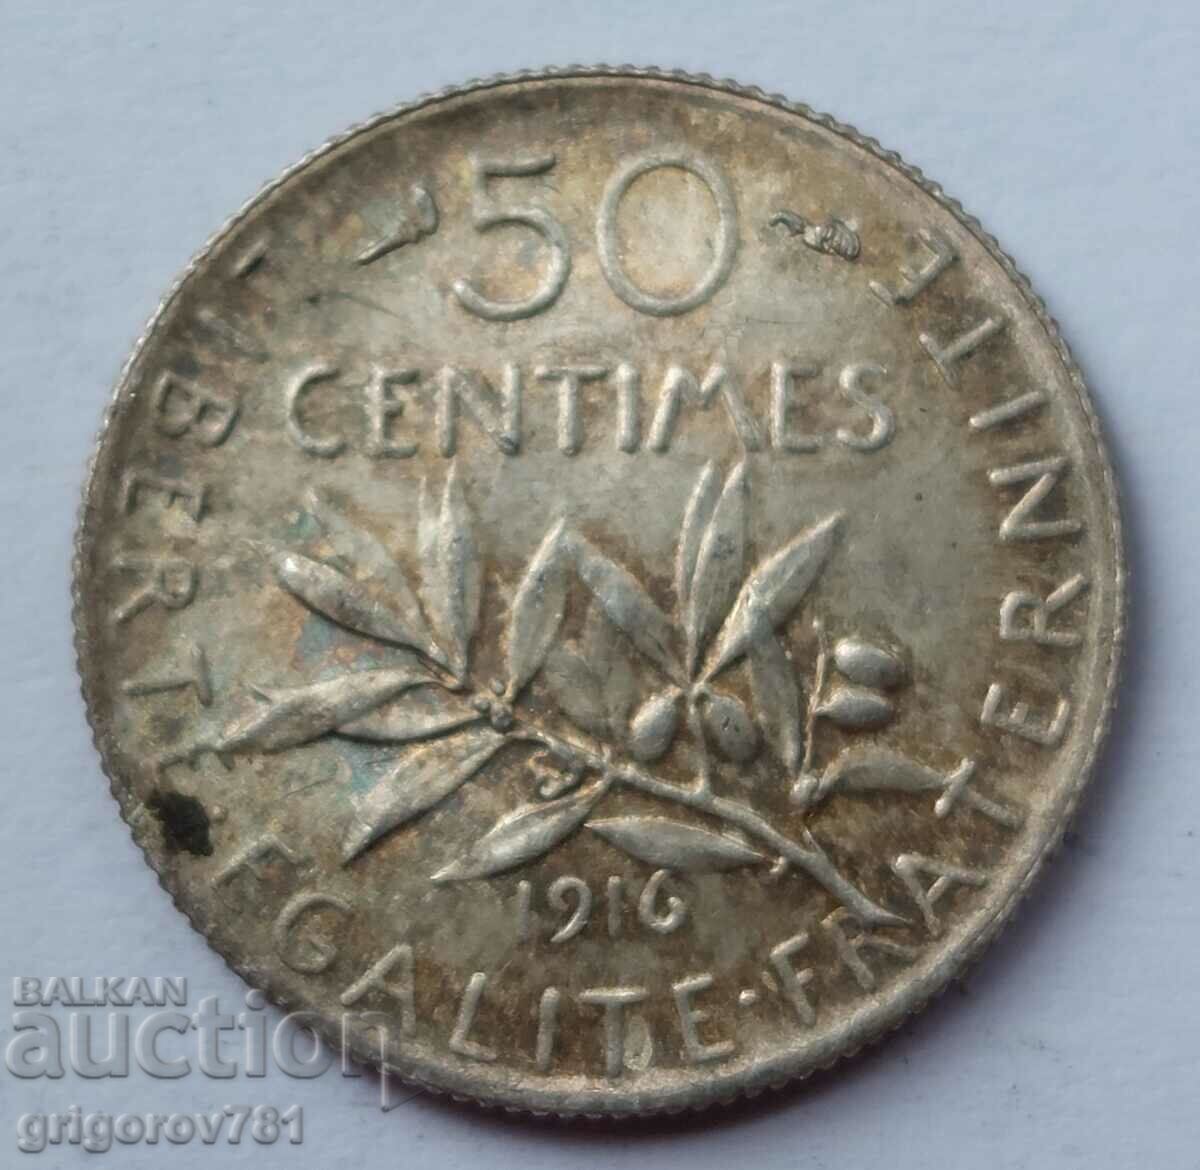 50 centimes silver France 1916 - silver coin №54